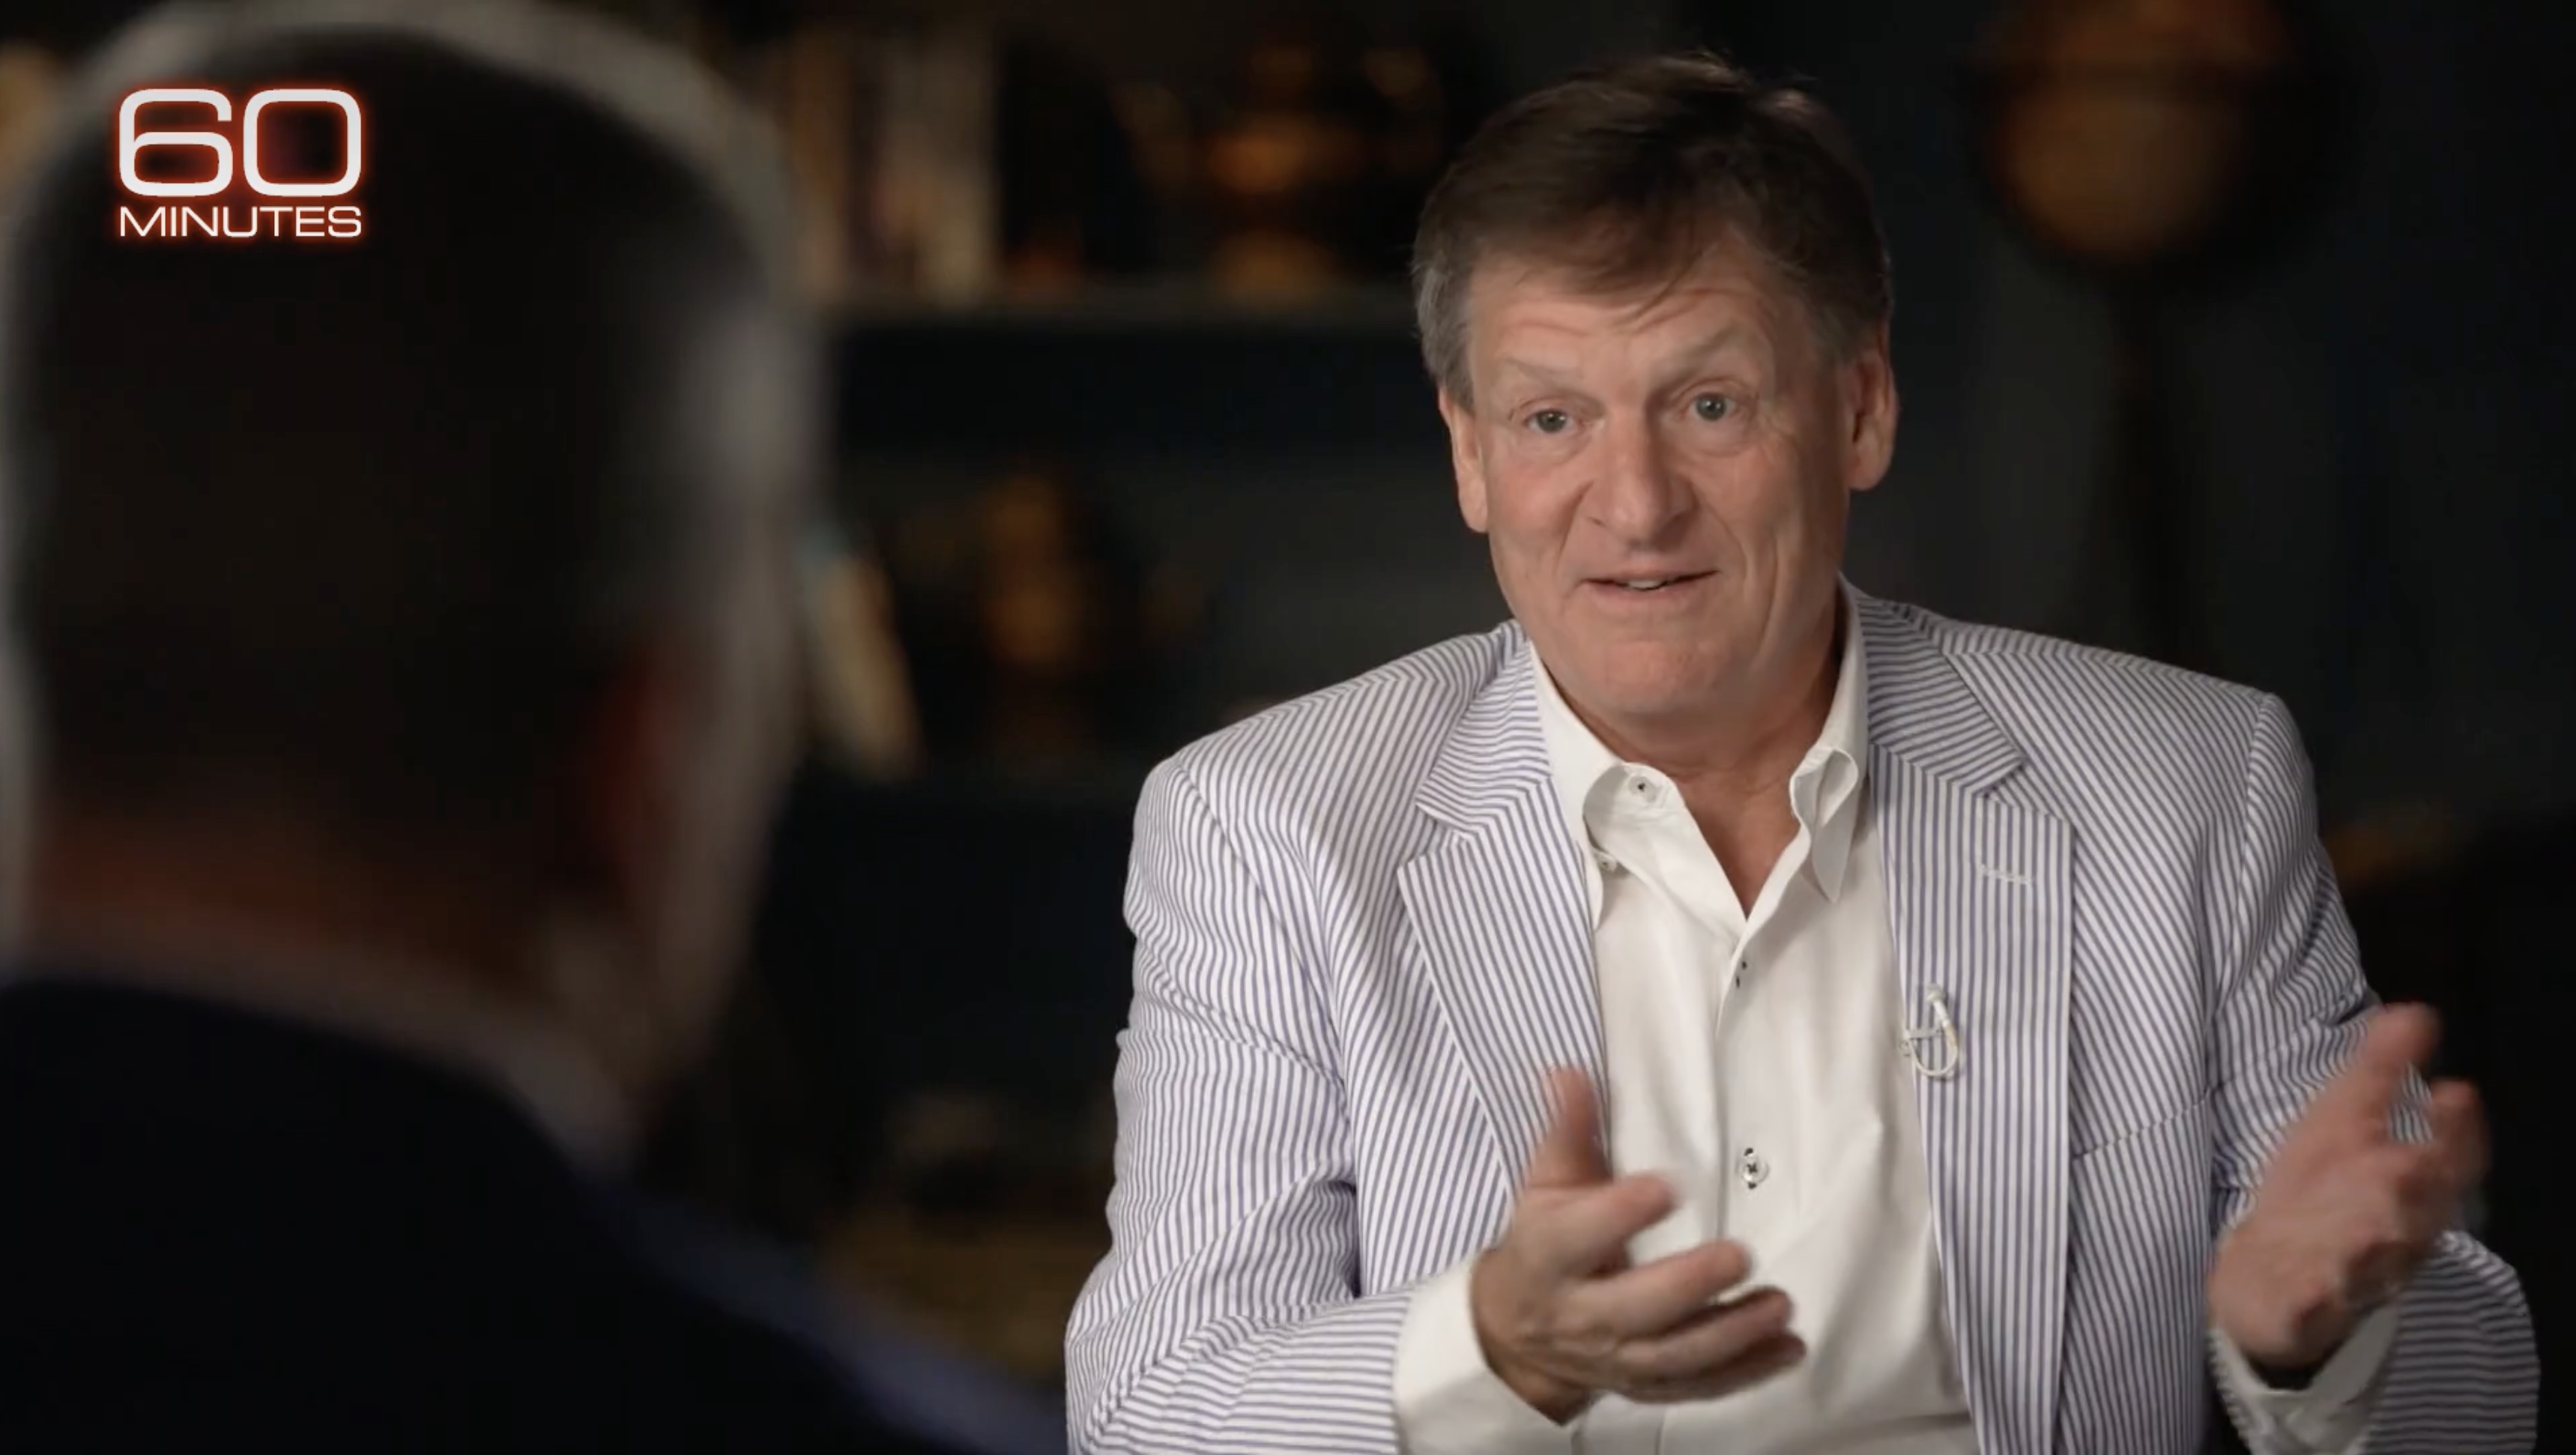 Author Michael Lewis sat down with 60 Minutes to provide his take on SBF, and the story of FTX's collapse.